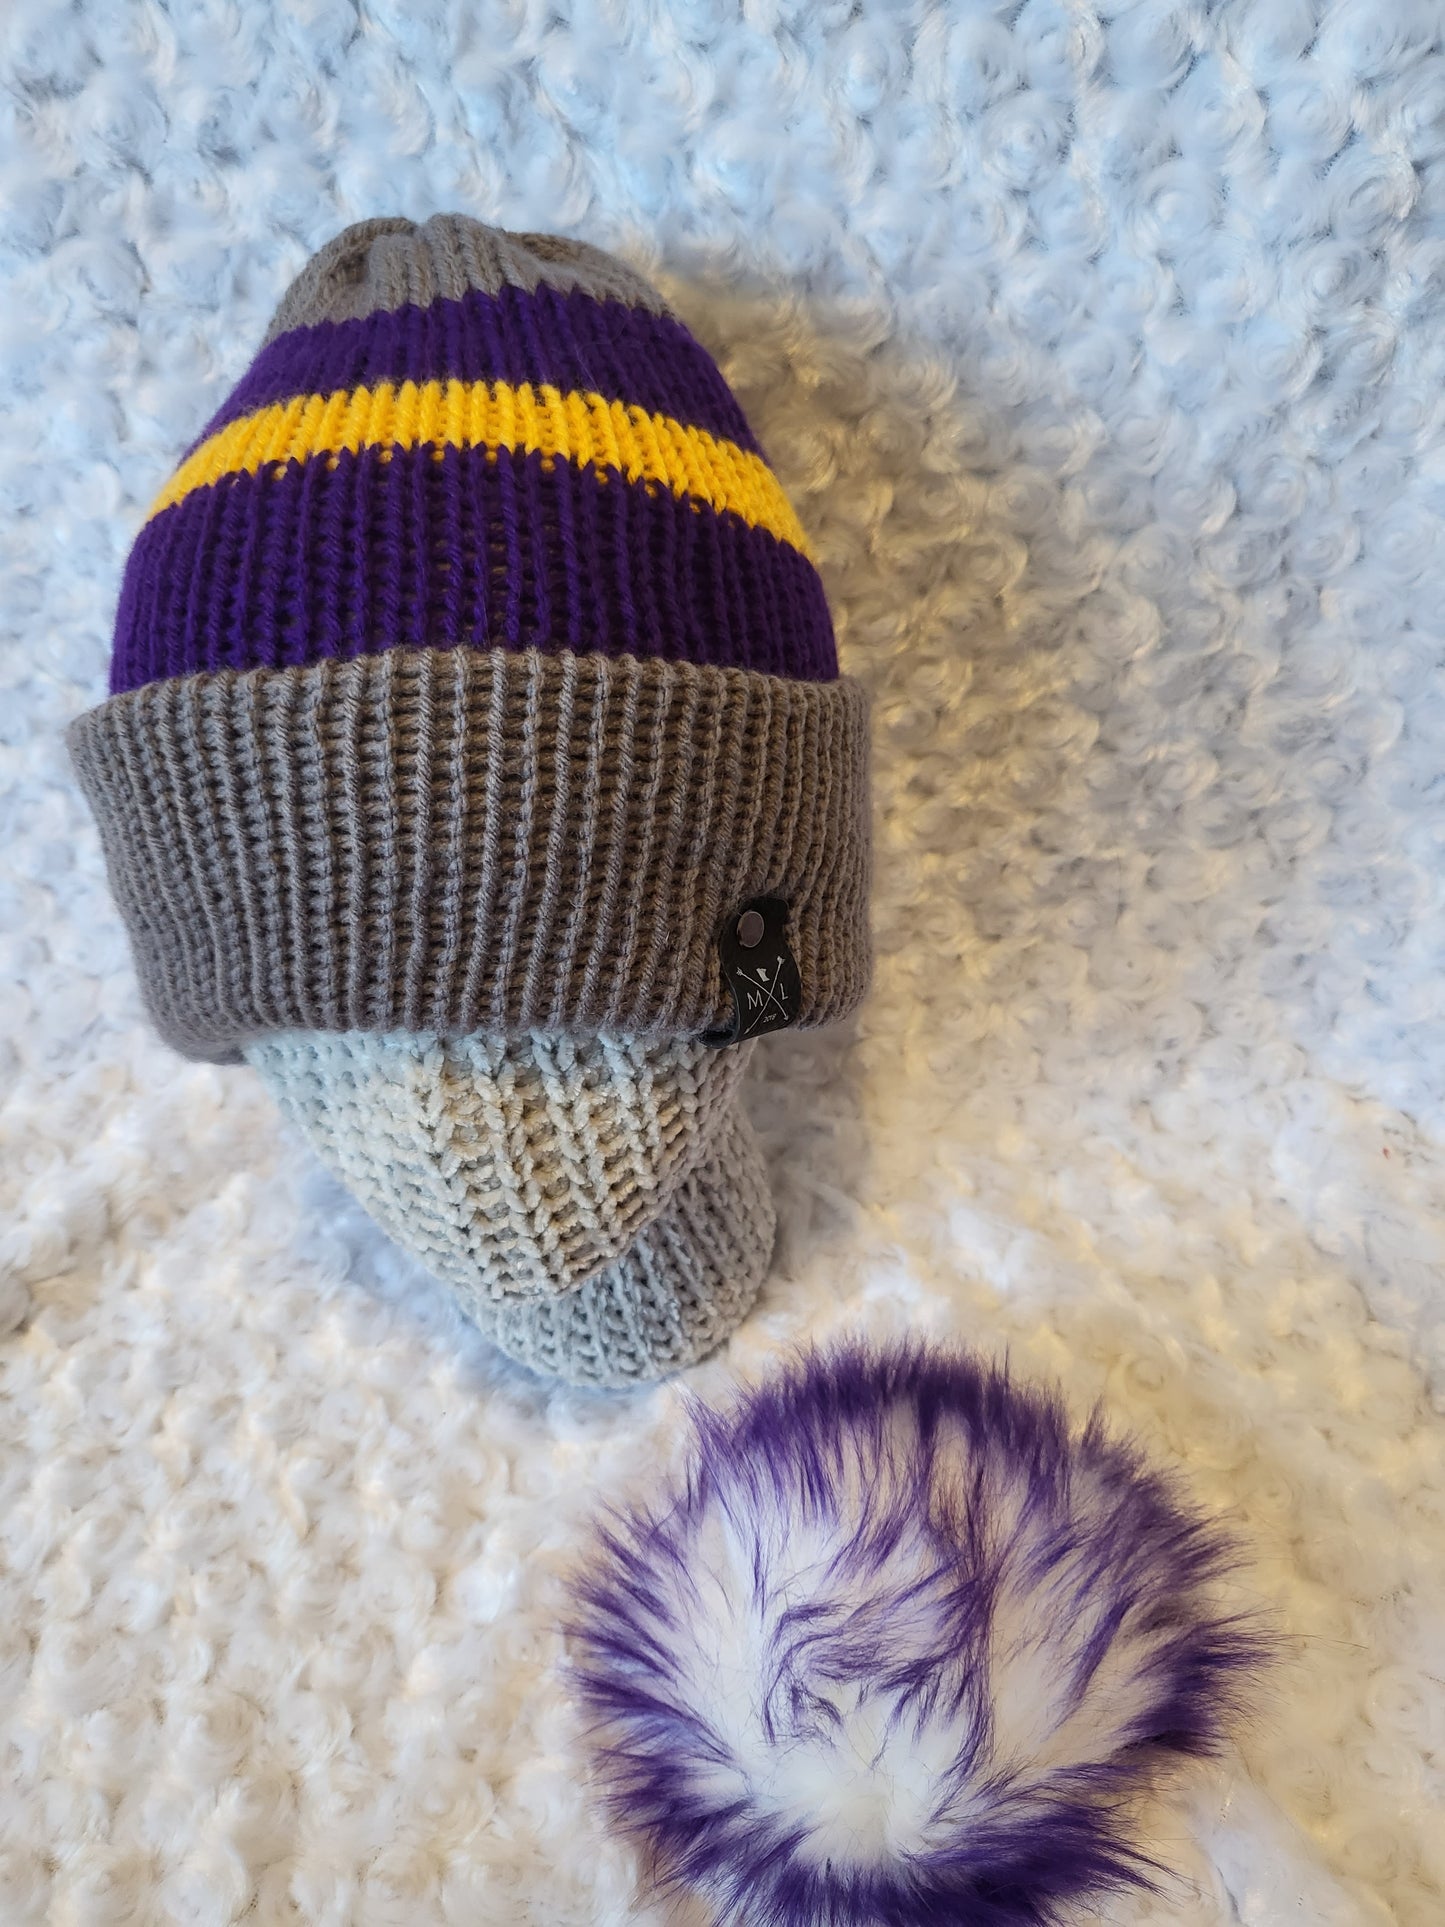 Knit Hats with removable pom pom - purple and gold